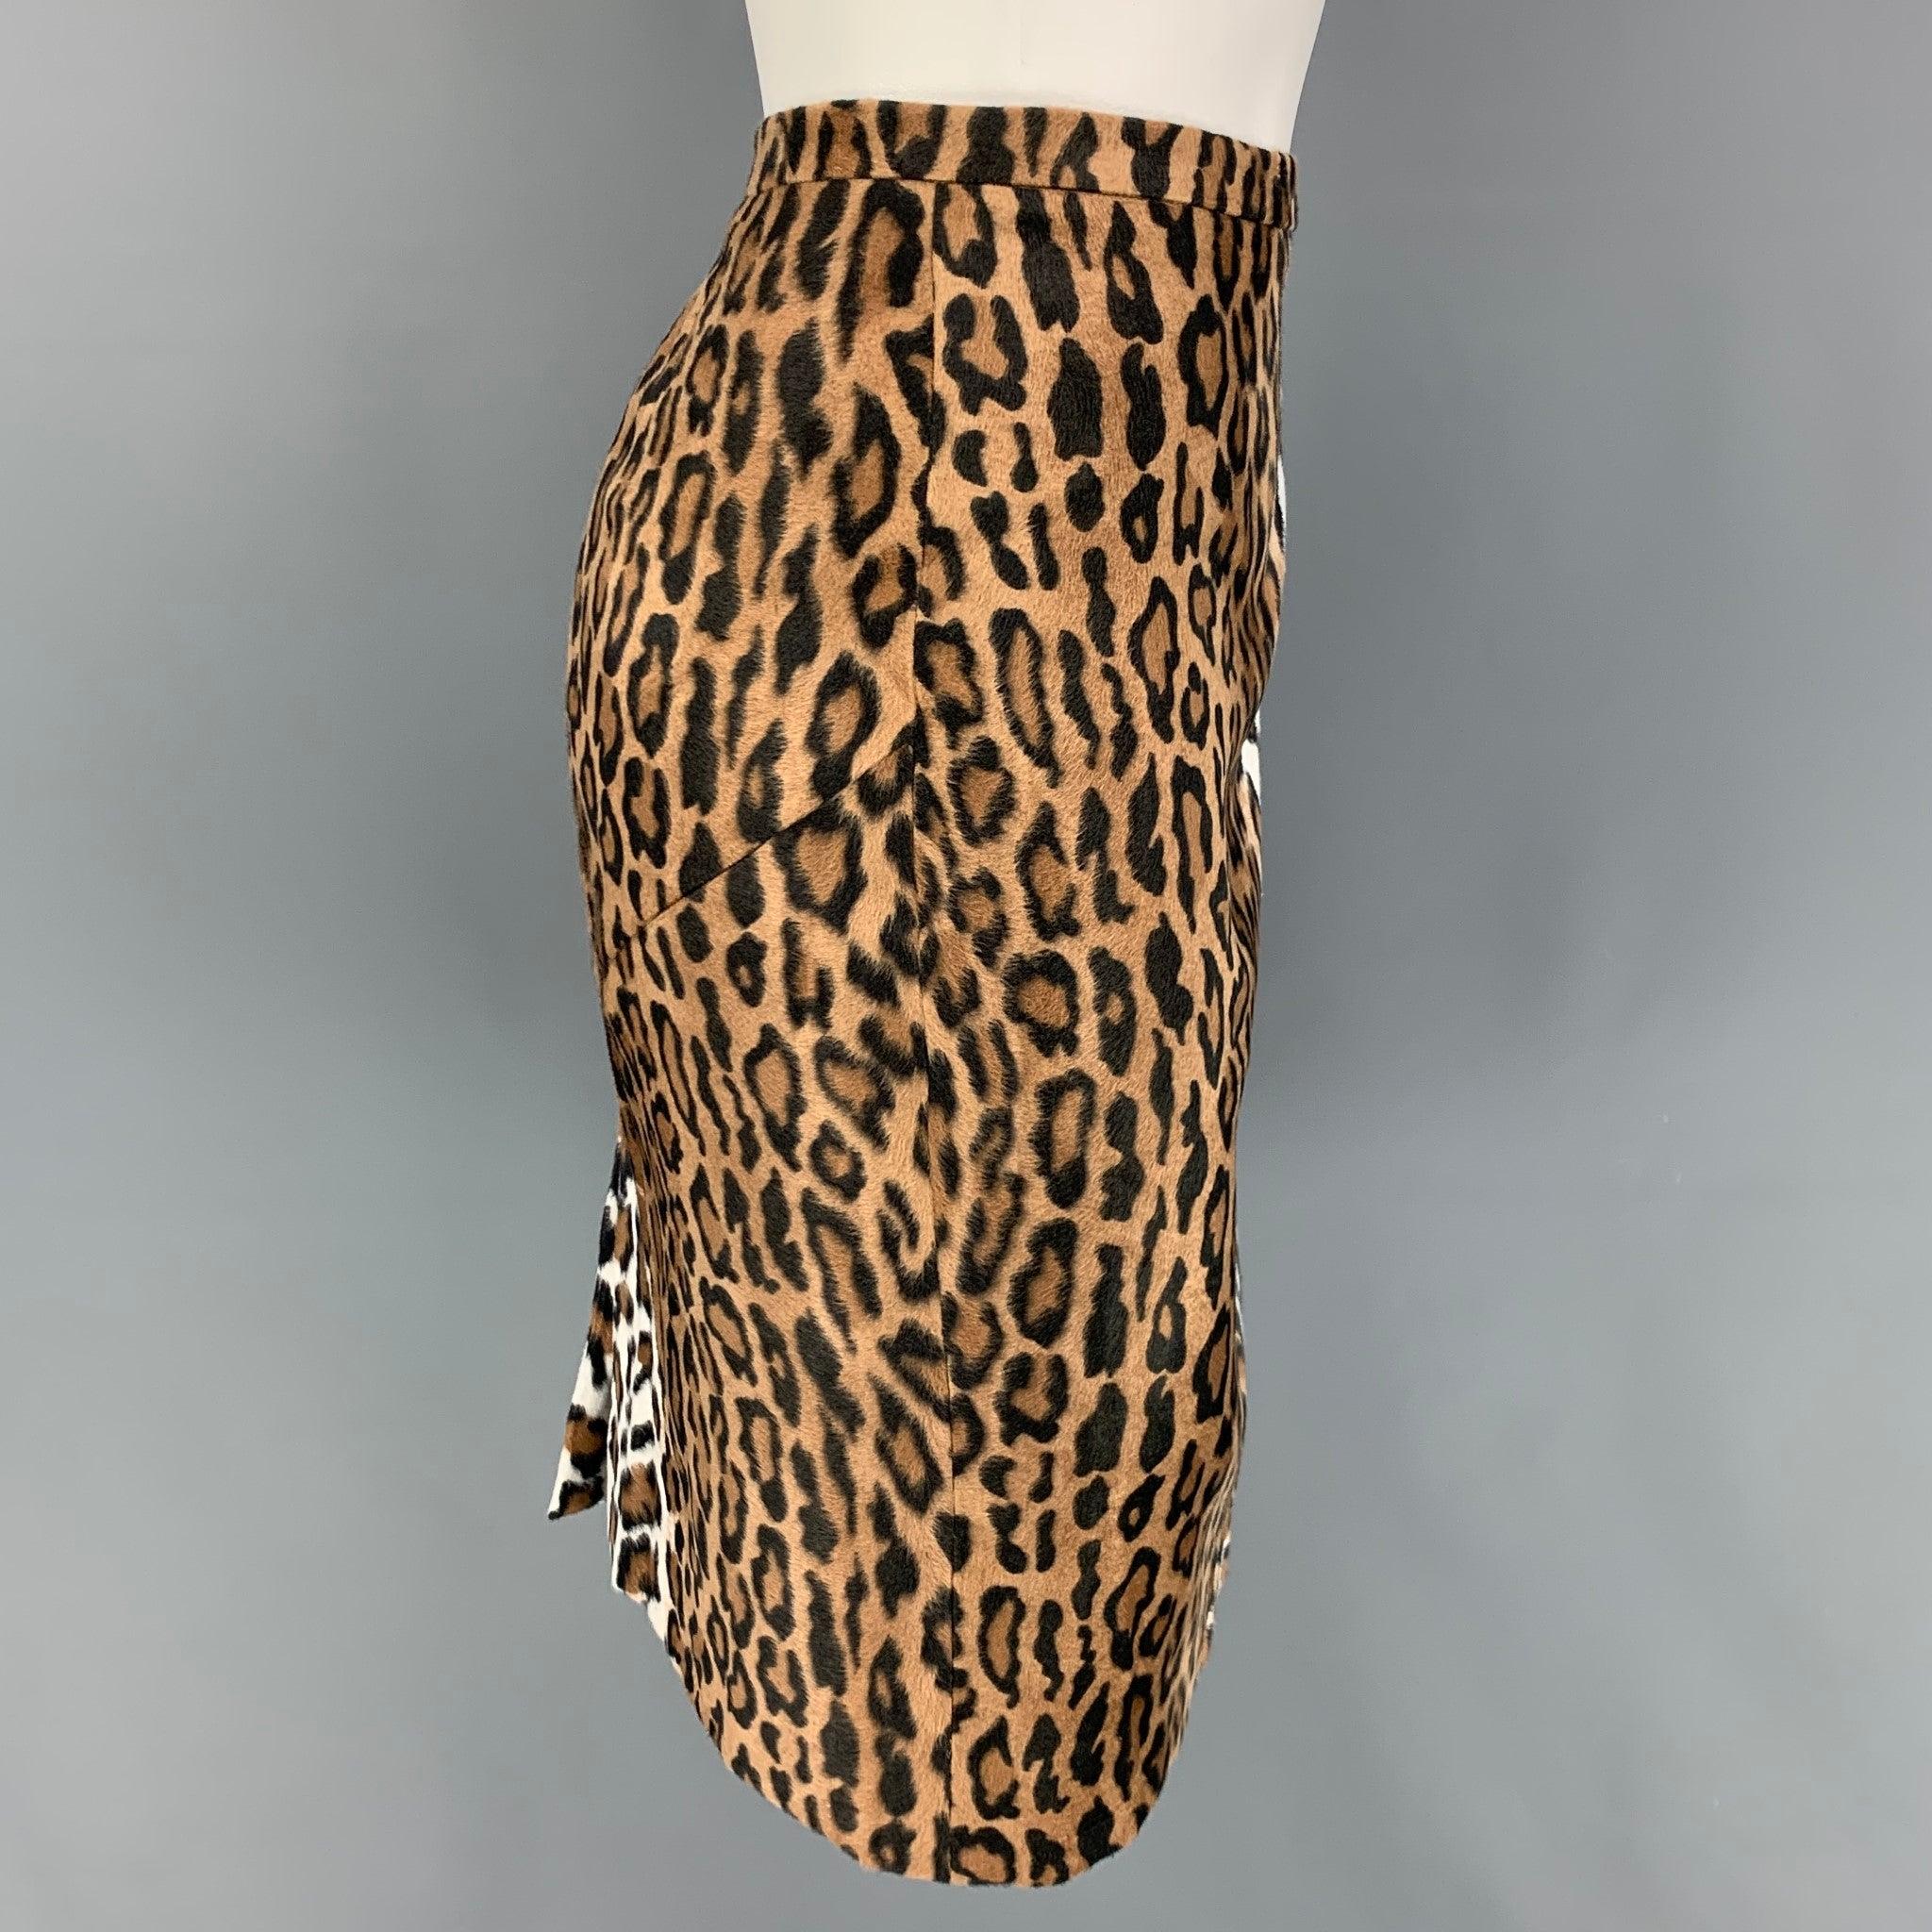 CHEAP and CHIC by MOSCHINO skirt comes in a beige & brown animal print acetate / rayon featuring a pencil style, back slit, and a side zipper closure. Made in Italy.
Very Good
Pre-Owned Condition. 

Marked:   I 44 / D 40 / F 40 / GB 12 / USA 10 